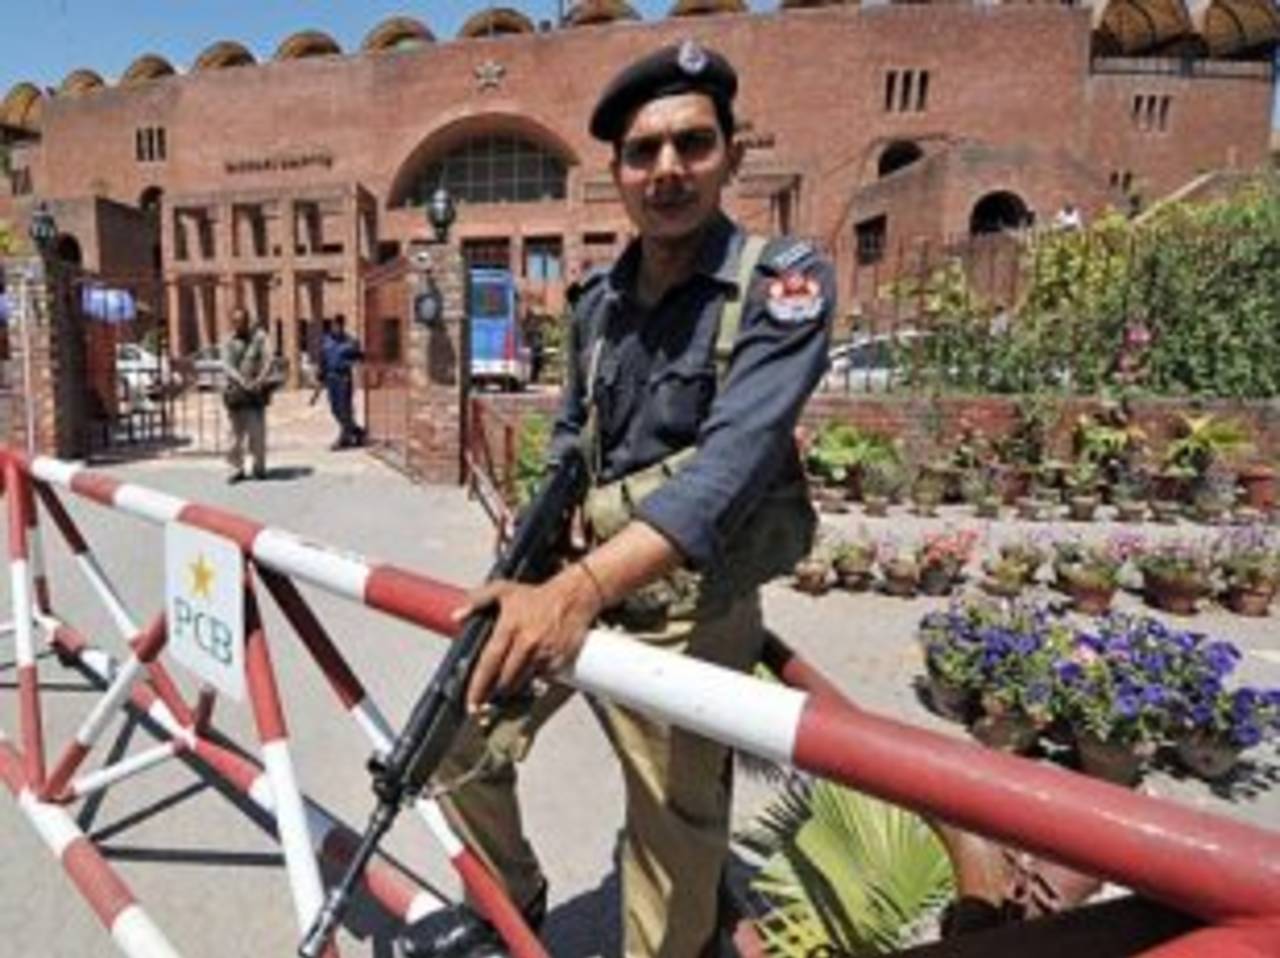 A security guard stands outside the Gaddafi Stadium, Lahore, April 10, 2009